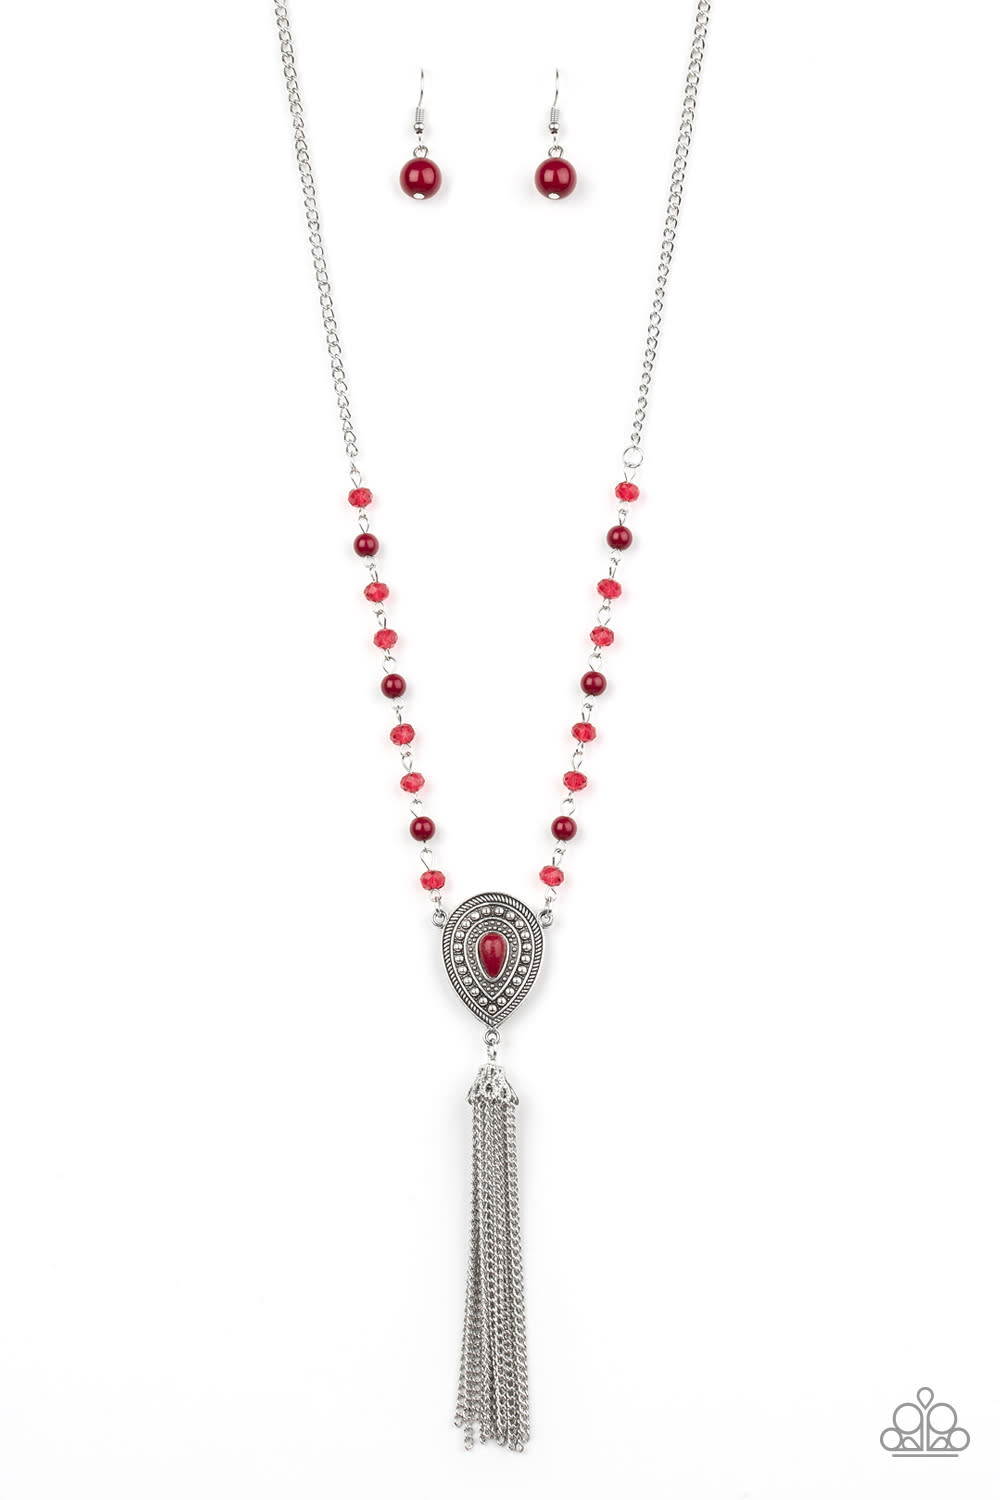 Soul Quest Paparazzi Accessories Necklace with Earrings - Red